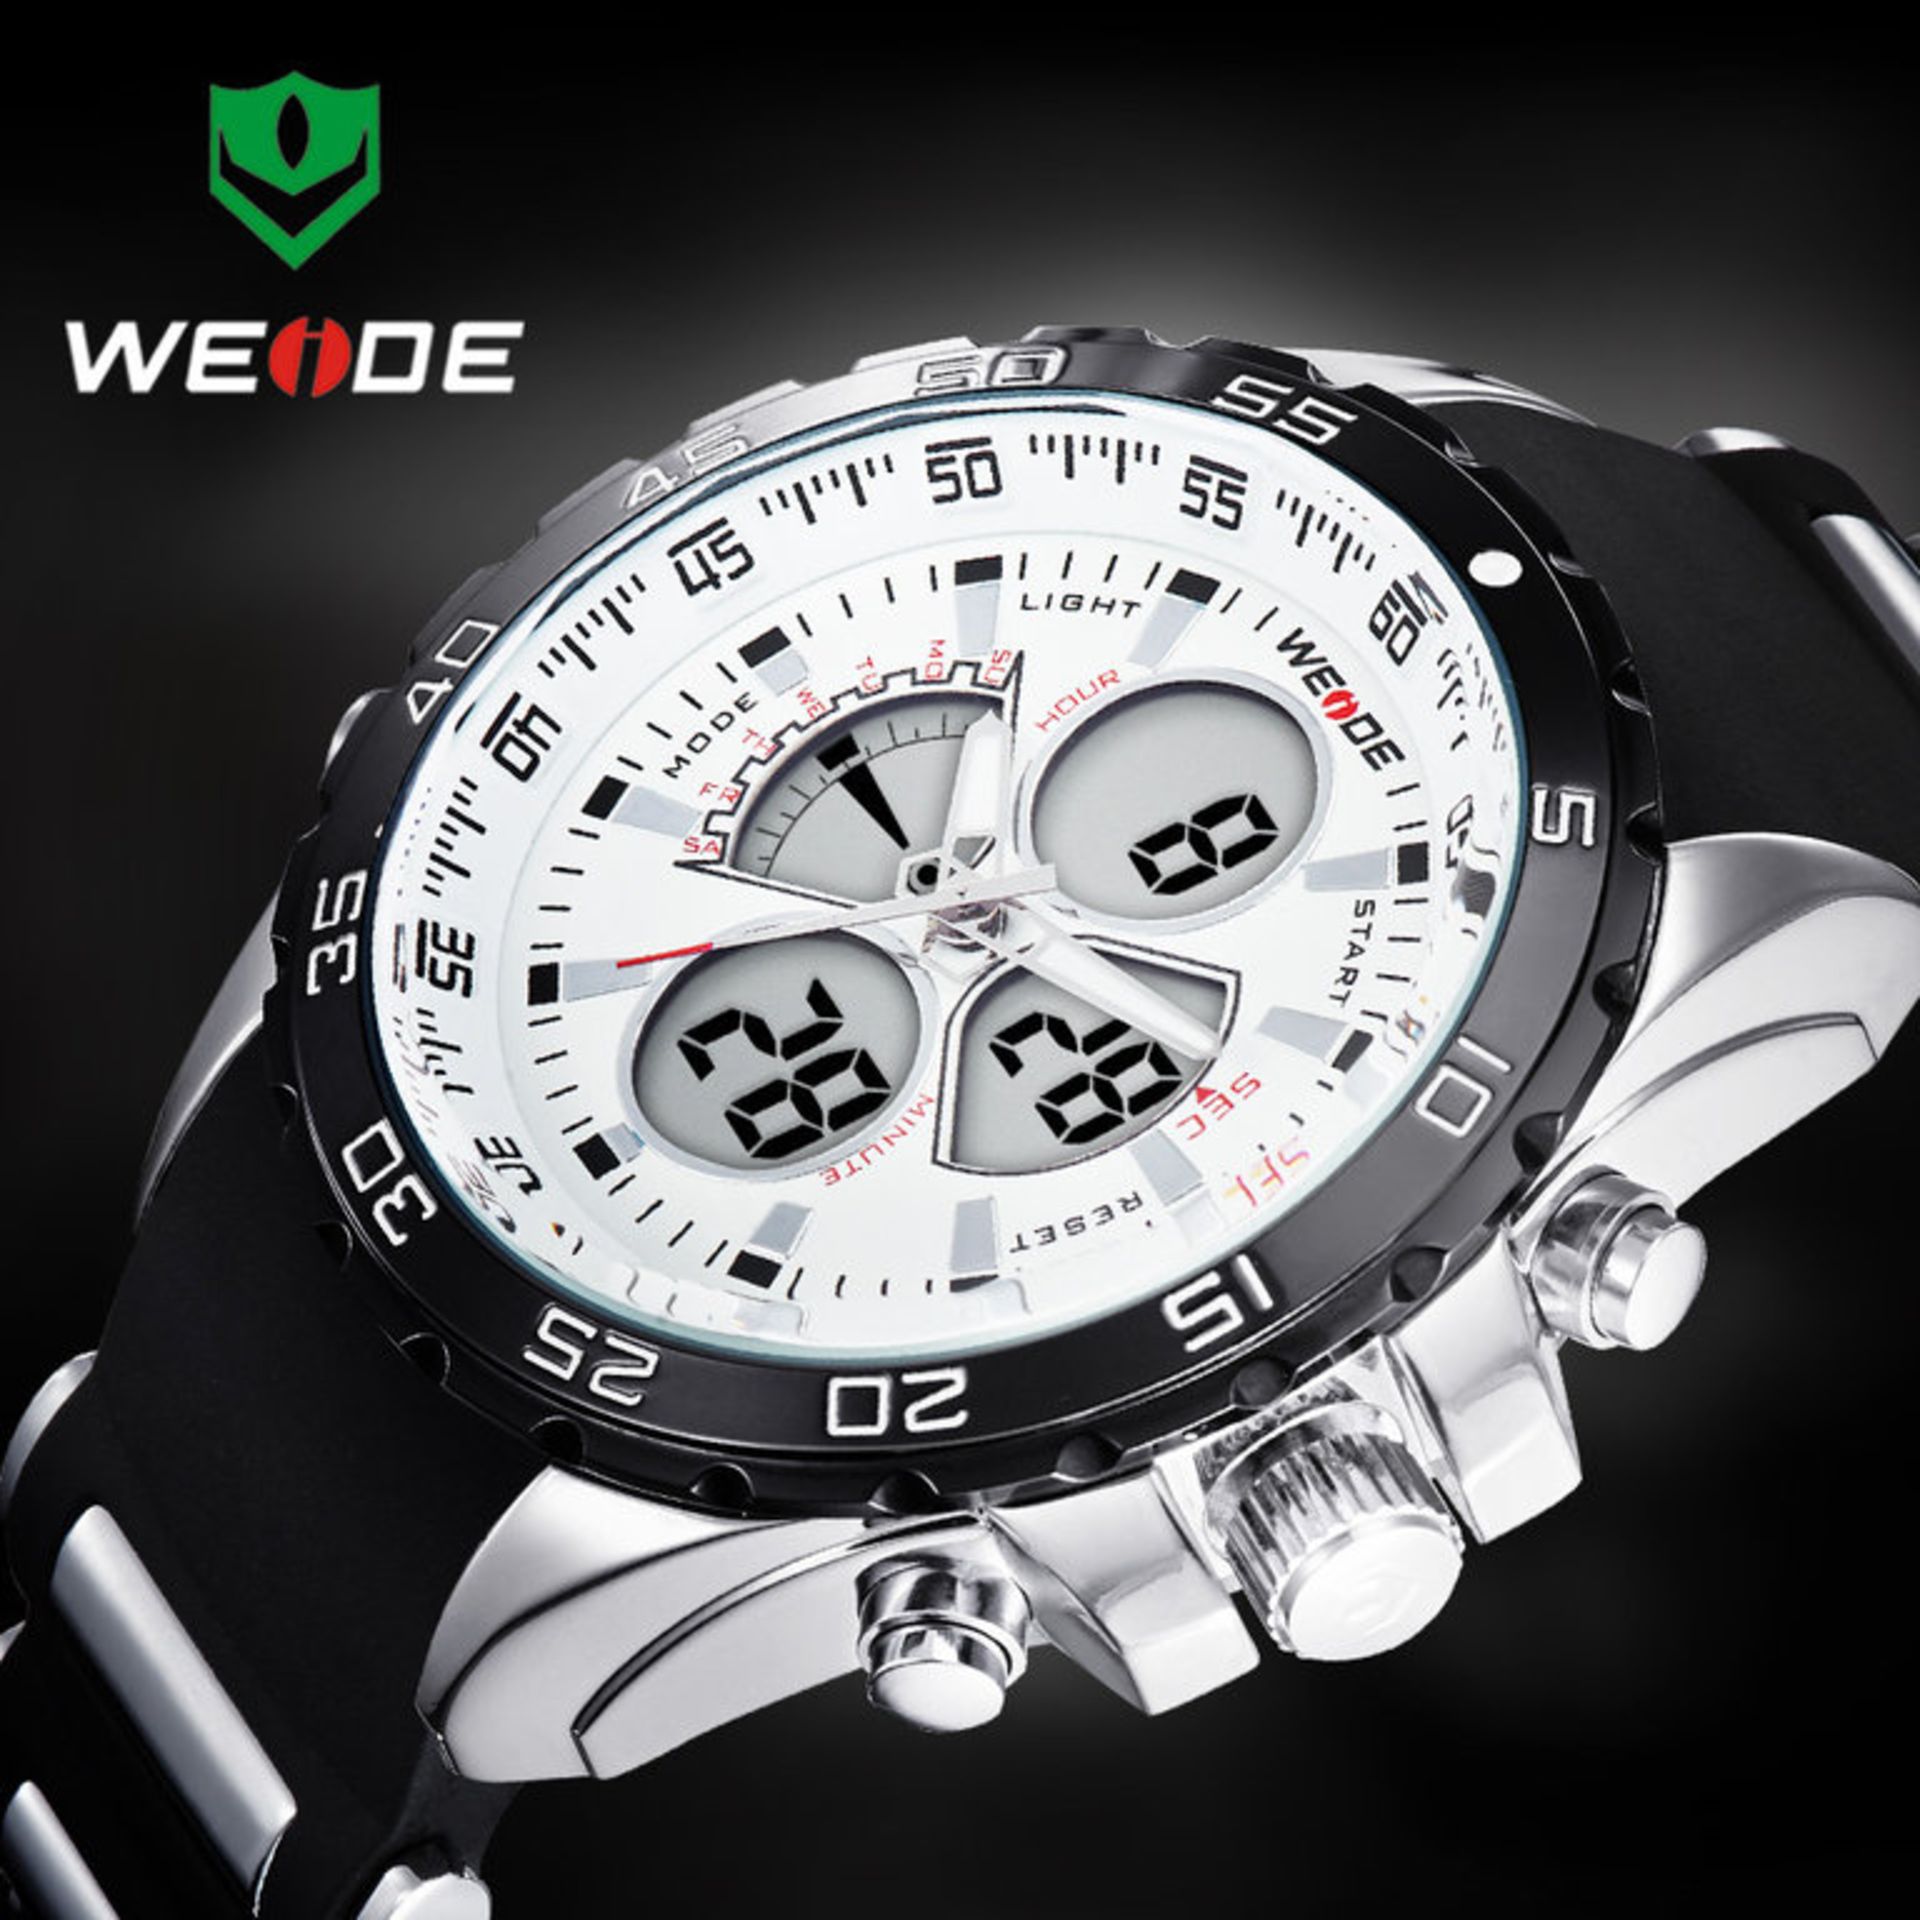 NEW MENS WENDE WATCH INCLUDING BOX  HUGE 48MM FACE